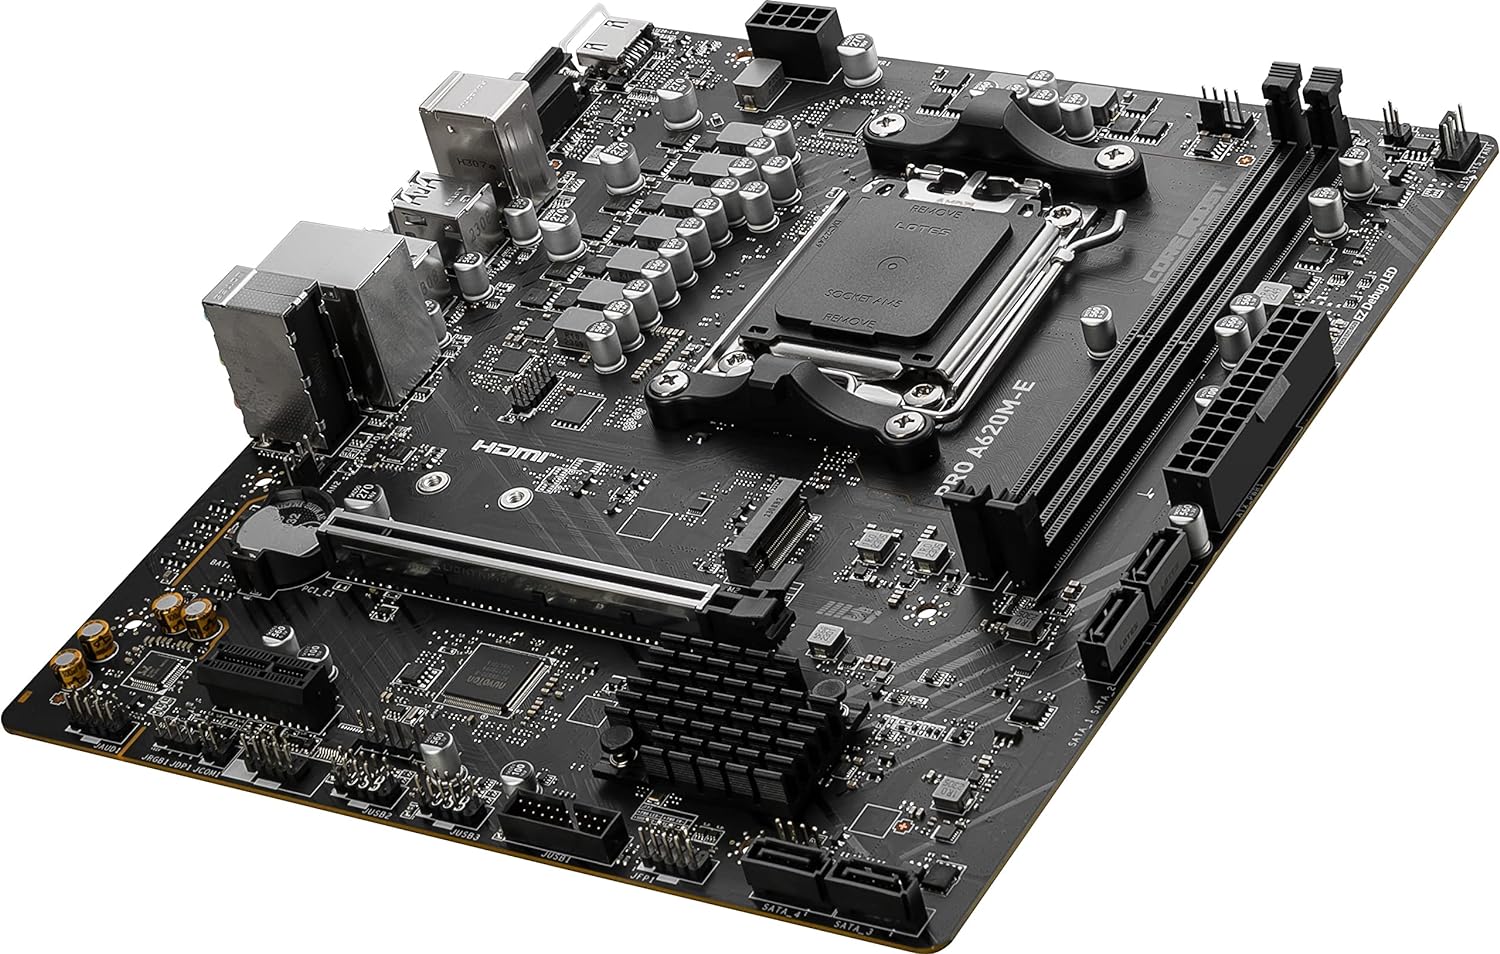 MSI PRO A620M-E ProSeries Motherboard - Advanced Memory Boost technology for pure data signals and compatibility. 0824142322406